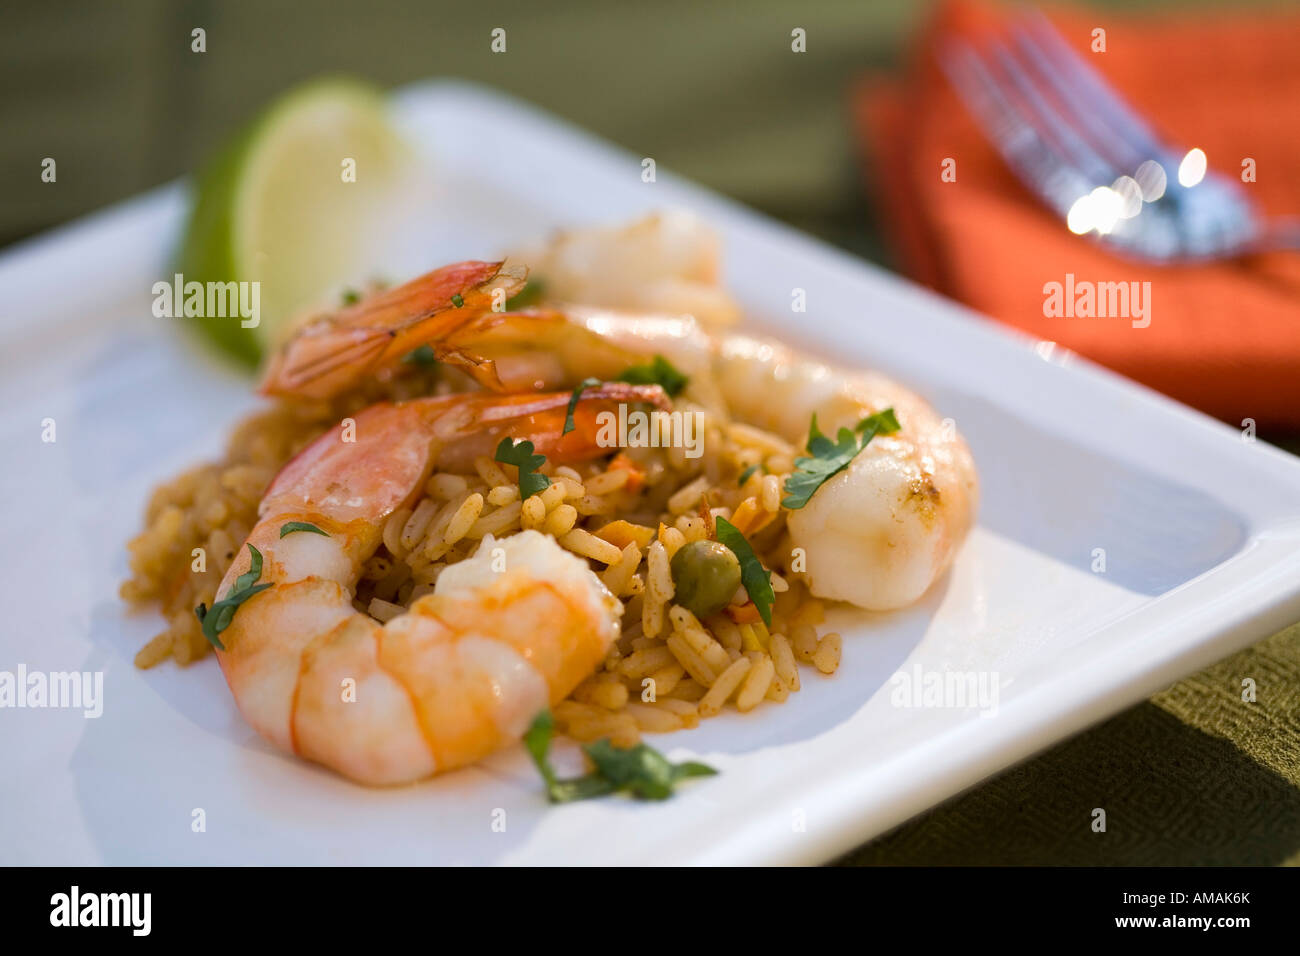 Dish of shrimps and rice Stock Photo